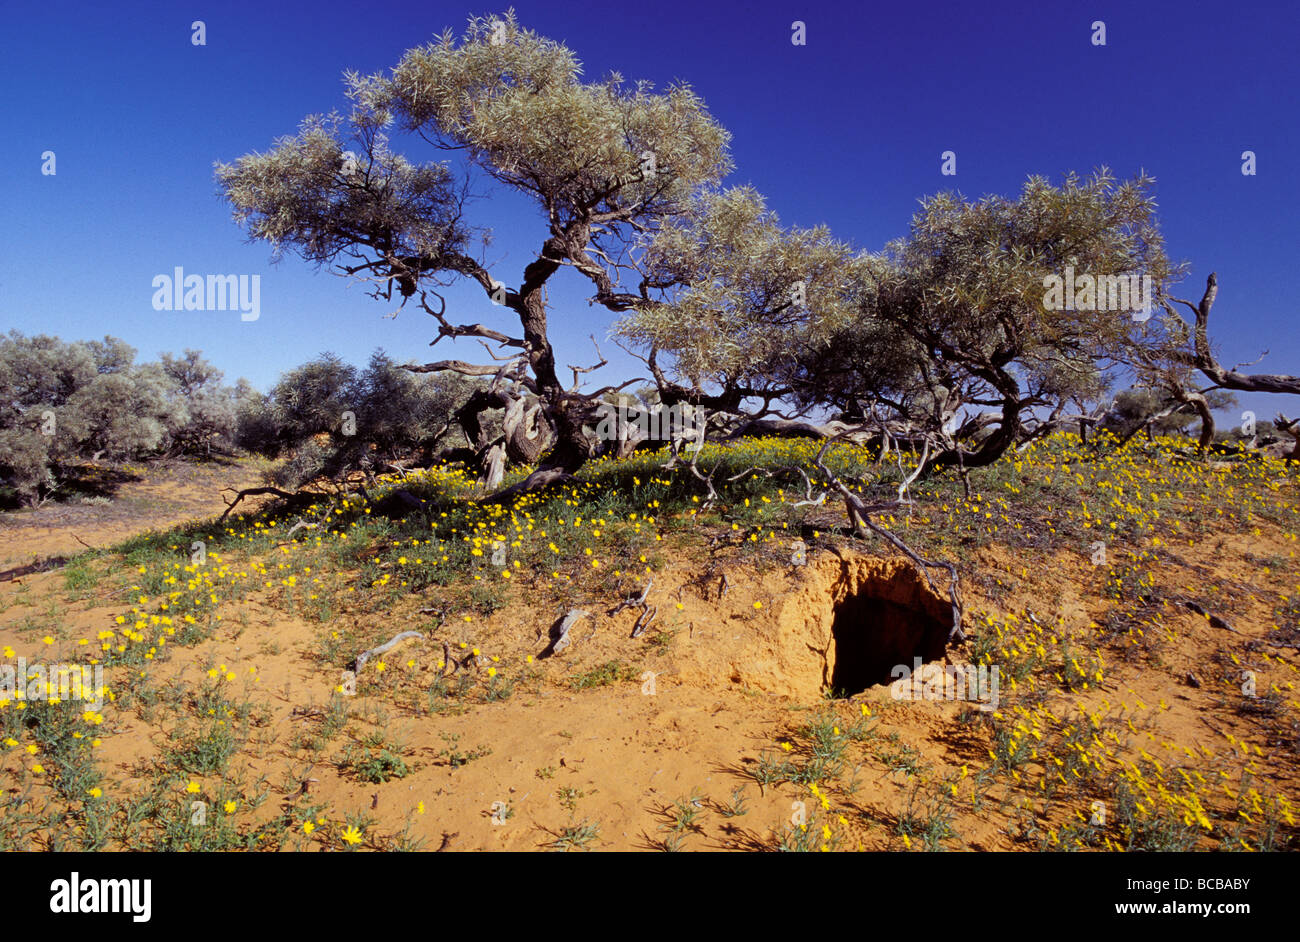 A Dingo's den dugout in a sand dune surrounded by wild flowers. Stock Photo